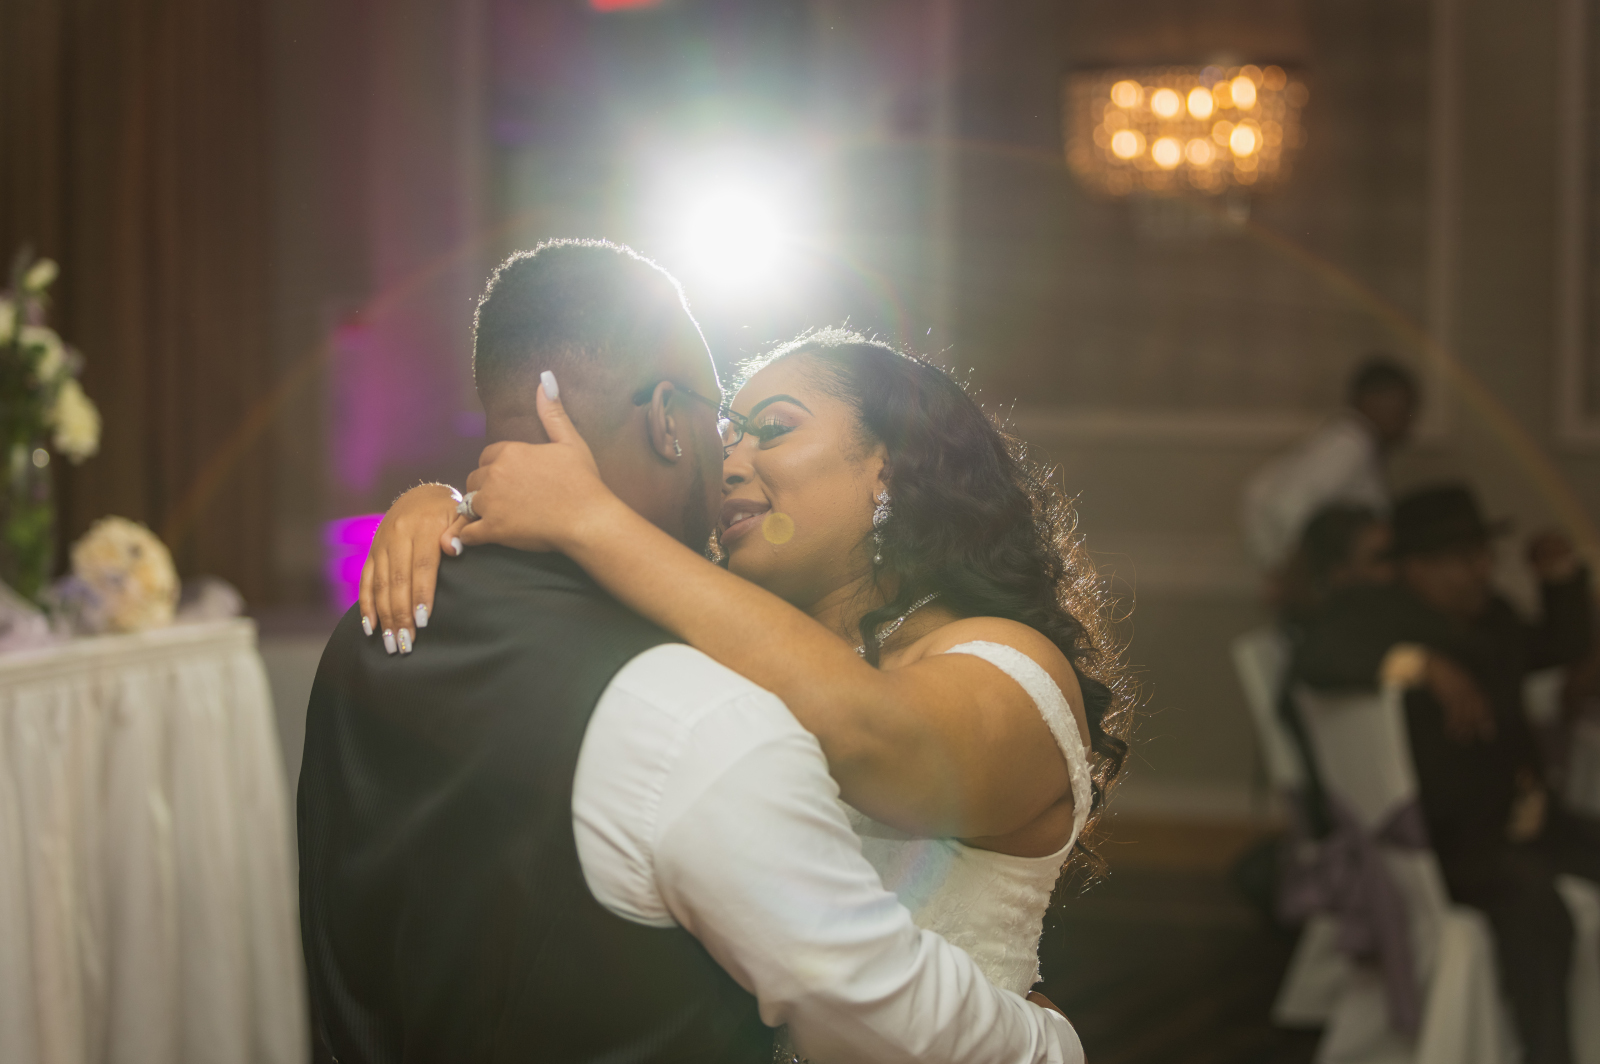 Bride and groom first dance, romantic, spotlight, unique wedding photo, beautiful African American bride, African American wedding, romantic wedding reception at Hilton Akron/Fairlawn